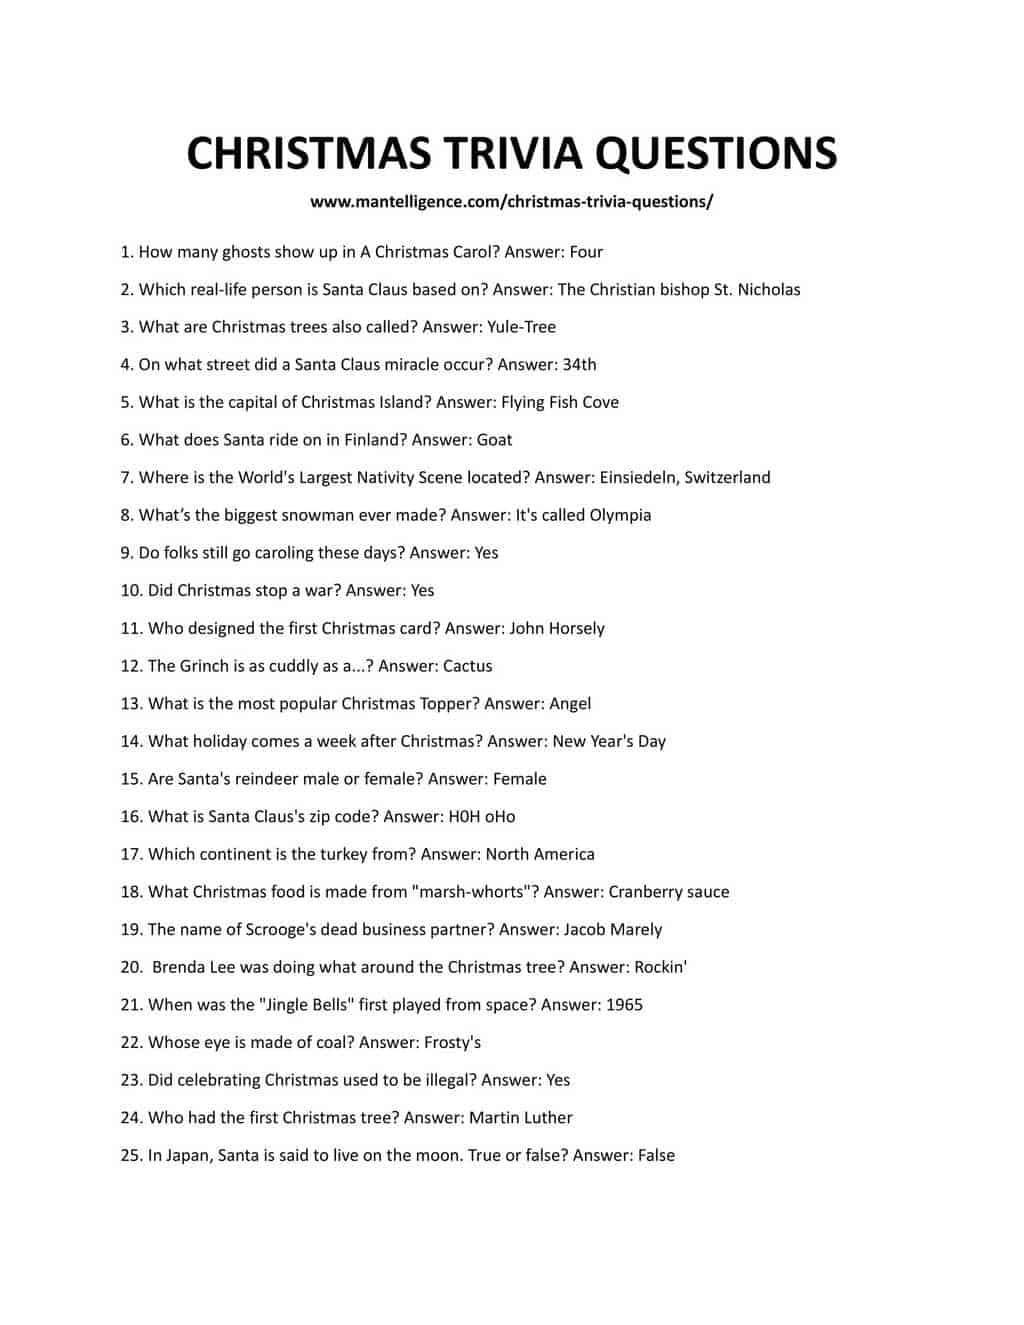 Christmas Trivia For Kids Printable Dec 10 2012 In A Christmas Story What Was The One Item 